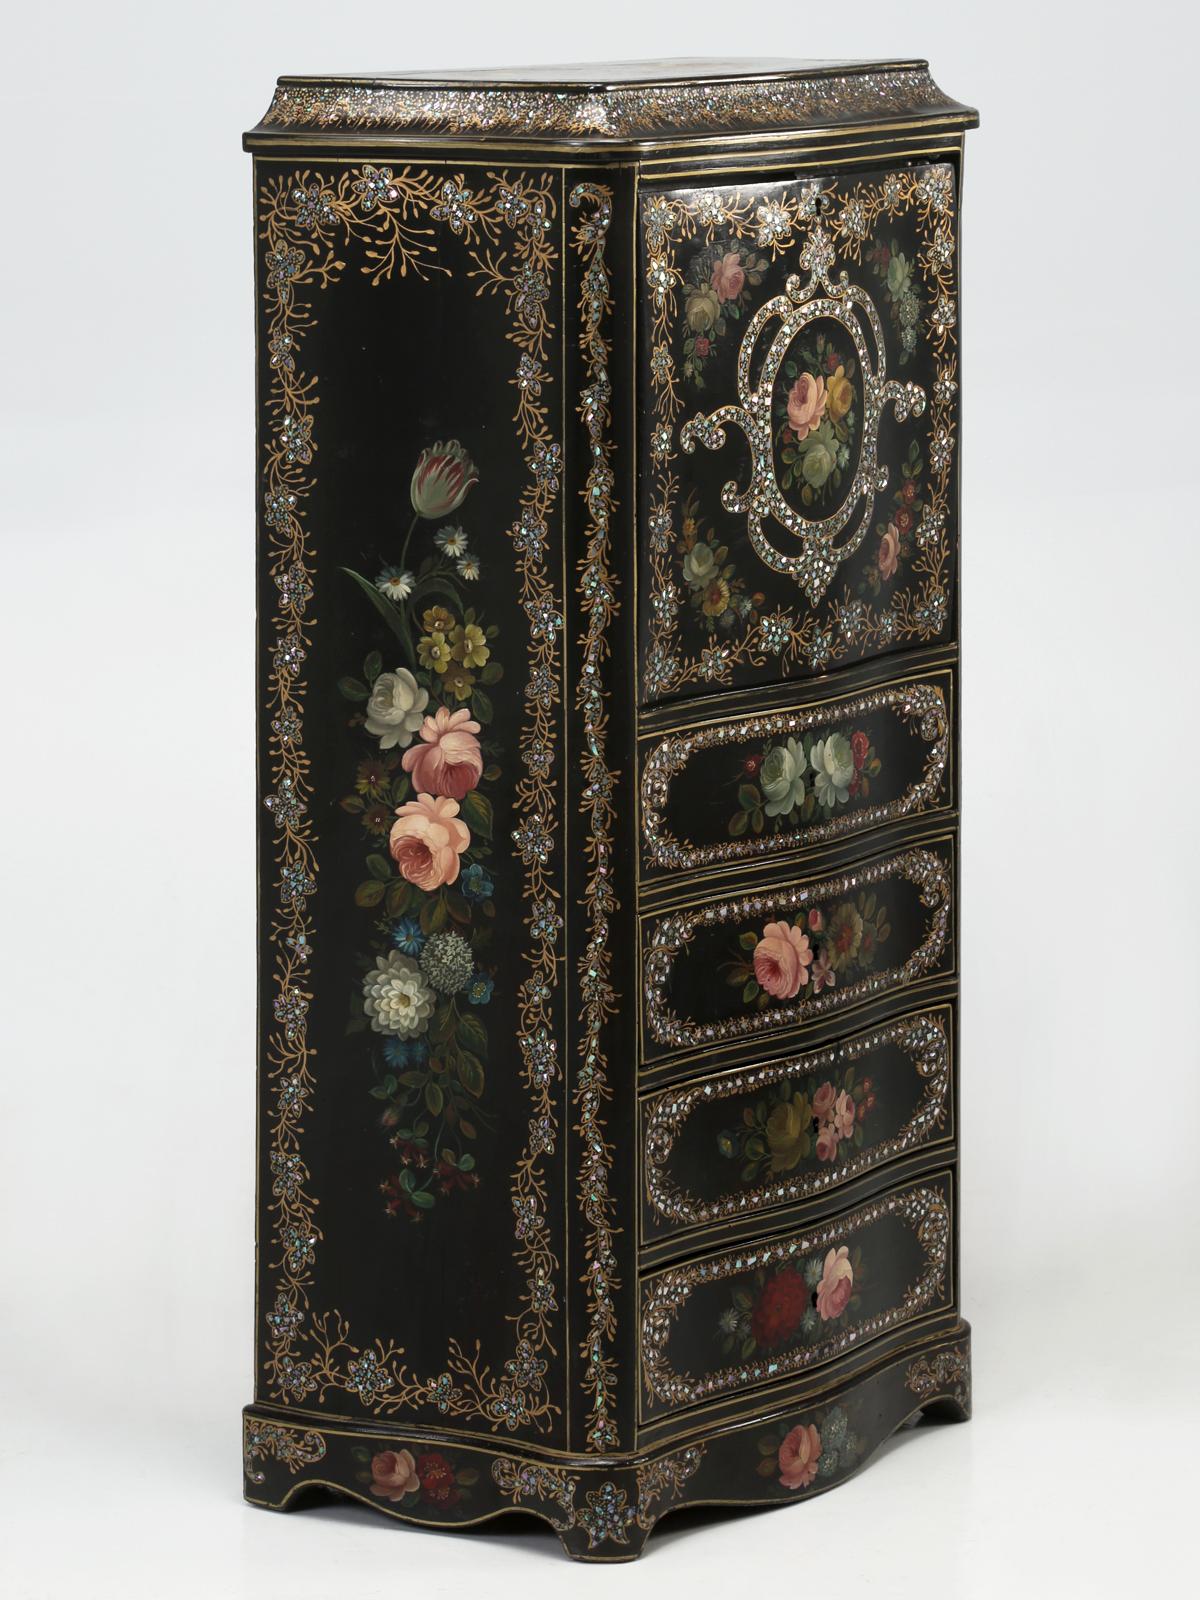 Antique French Napoleon III Secretary in black lacquer with mother of pearl inlay and highlighted with hand-painted flowers. There is some shrinkage damage to the exterior of the case, which can be restored in 2-3-days. This antique French secretary